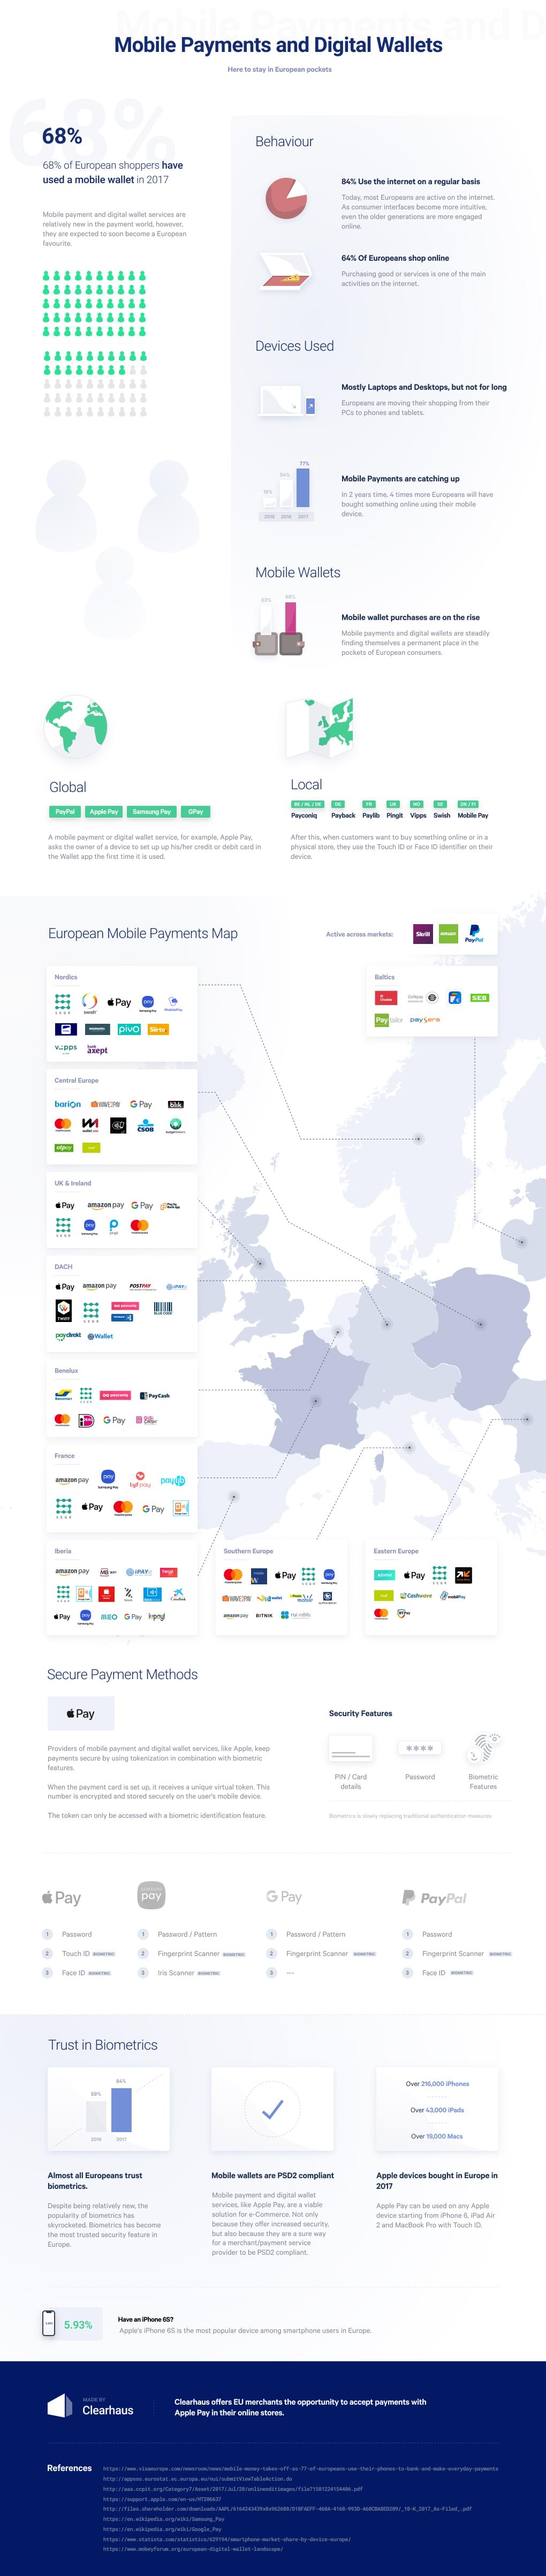 statistics on mobile payments in Europe and an overview of the different providers